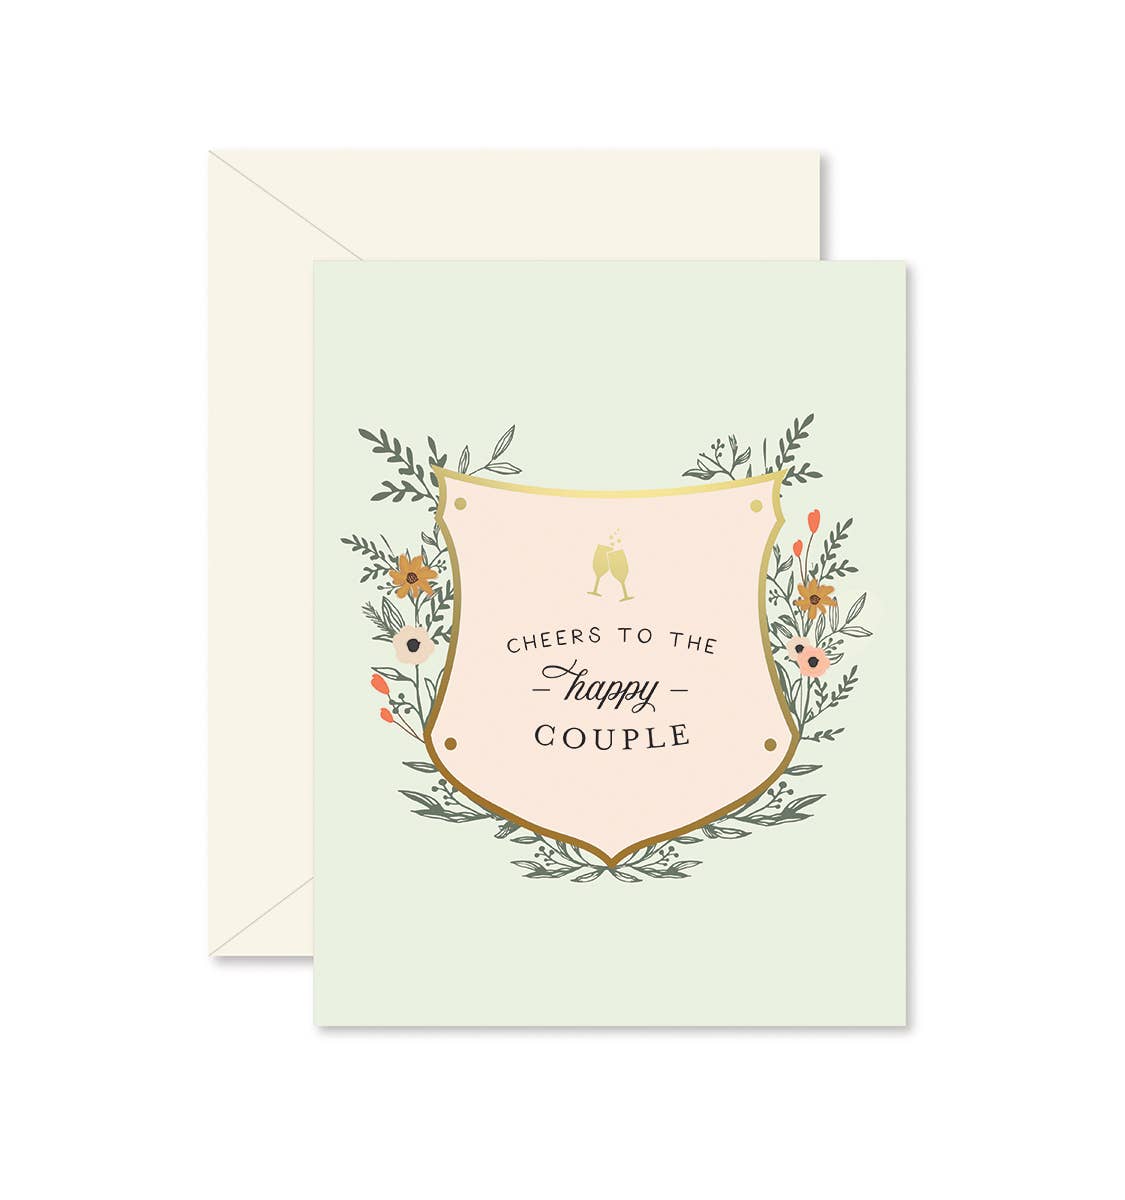 Ginger P. Designs - Cheers to the Happy Couple Greeting Card